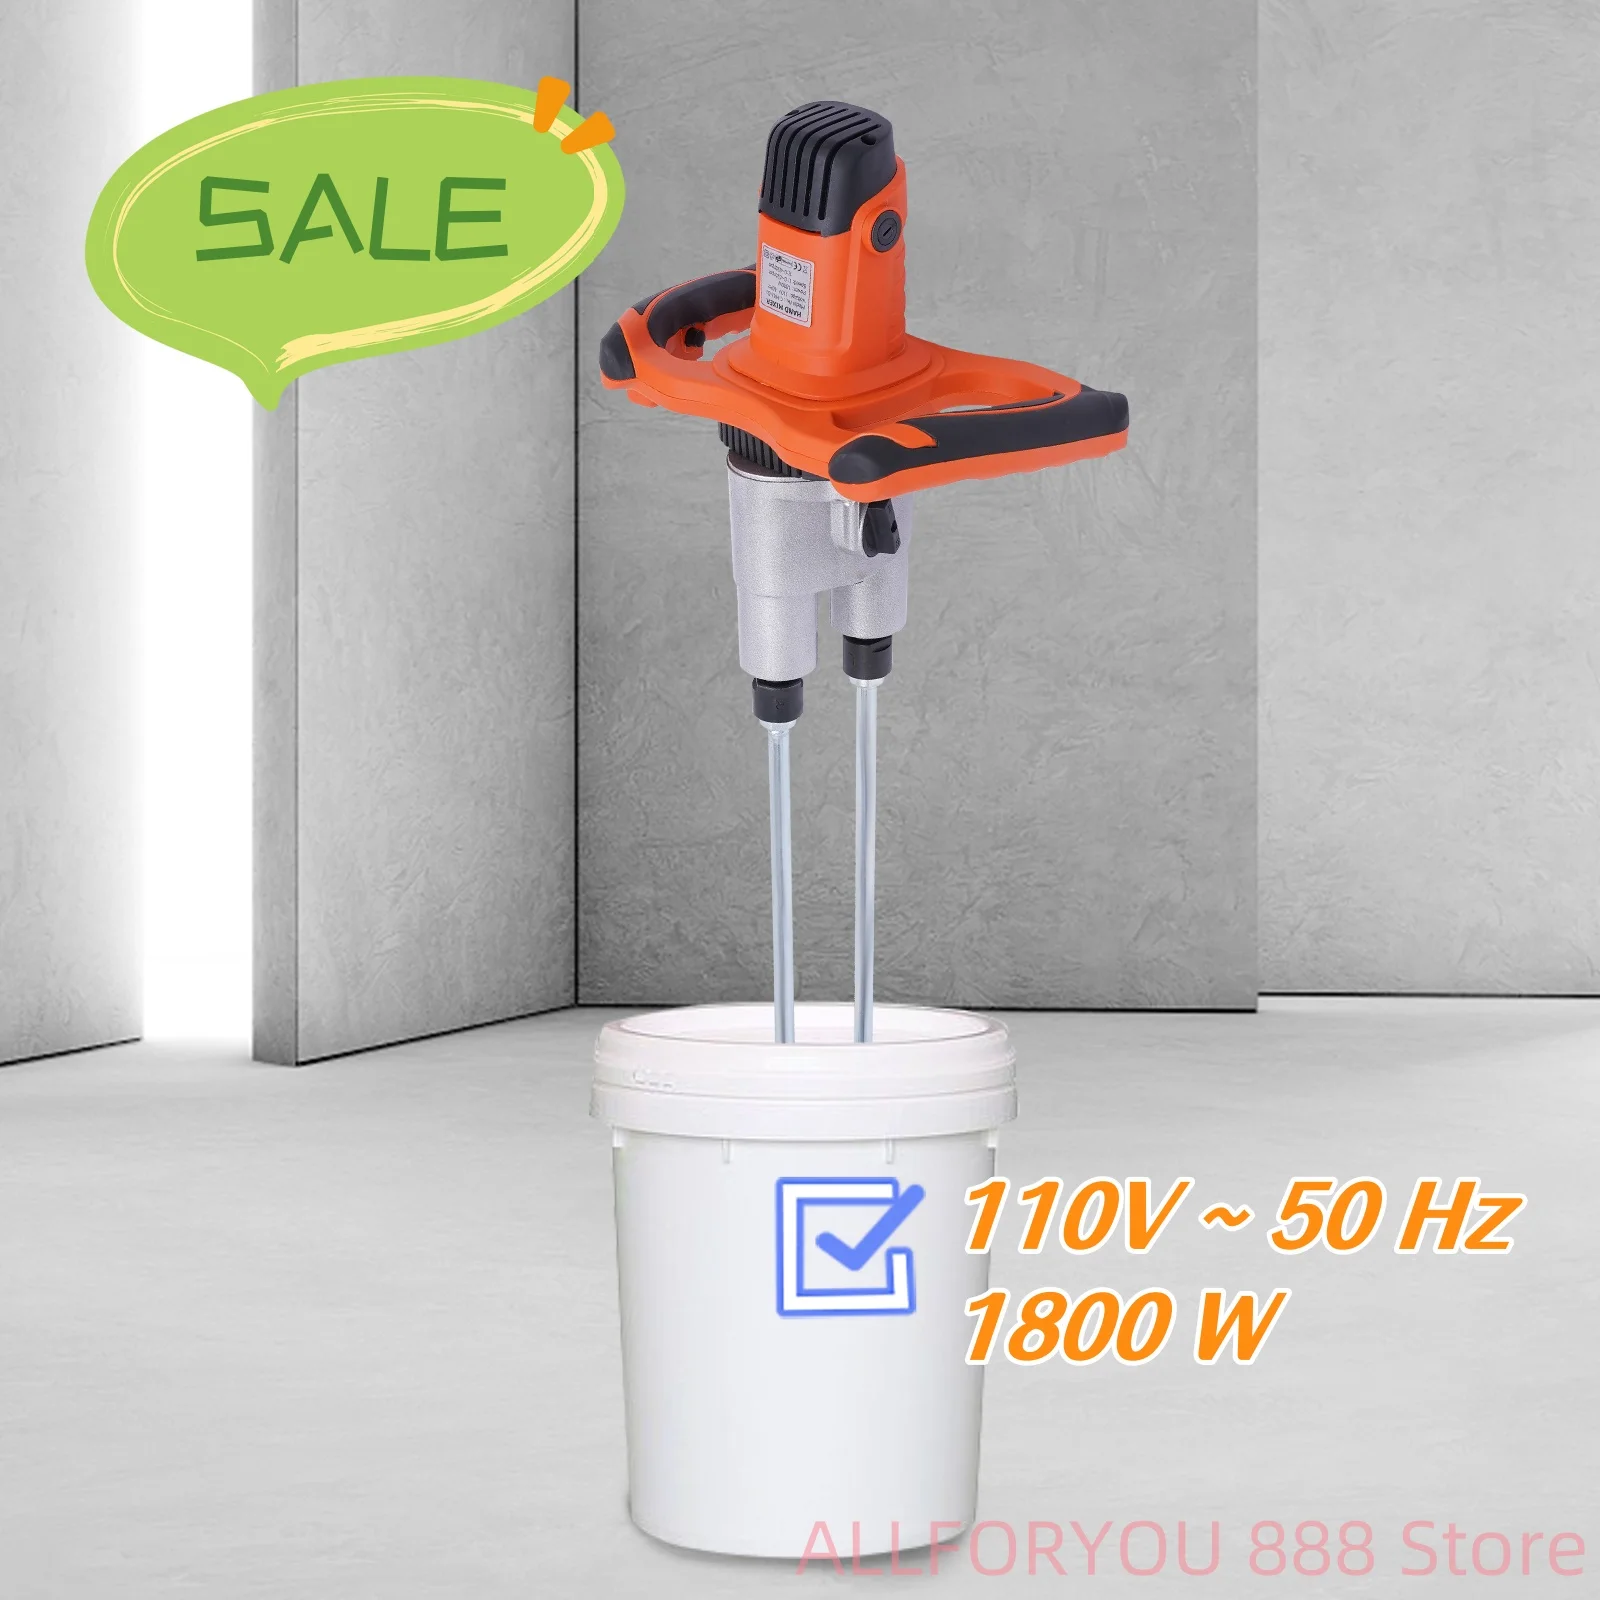 1800W Double Paddle Electric Mortar Mixer 2 Speed with Robust Aluminum Die-cast Housing Powerful and Handy telescopic magnetic pen with led light handy tool magnet capacity for picking up nut bolt adjustable pickup rod stick gift